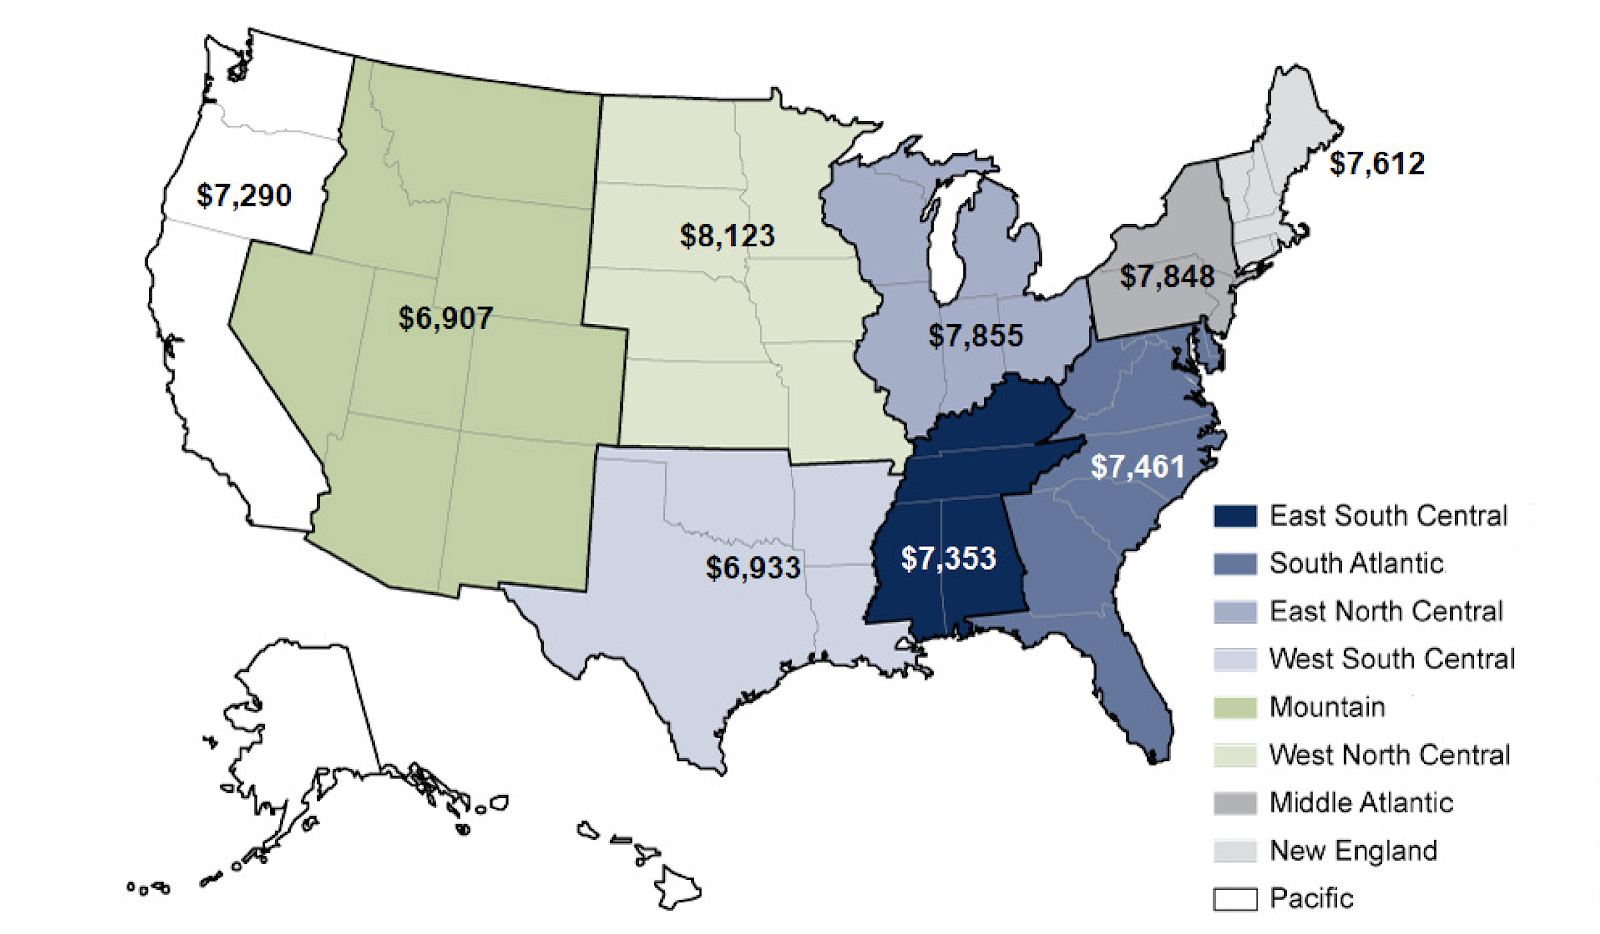 Burial costs by state